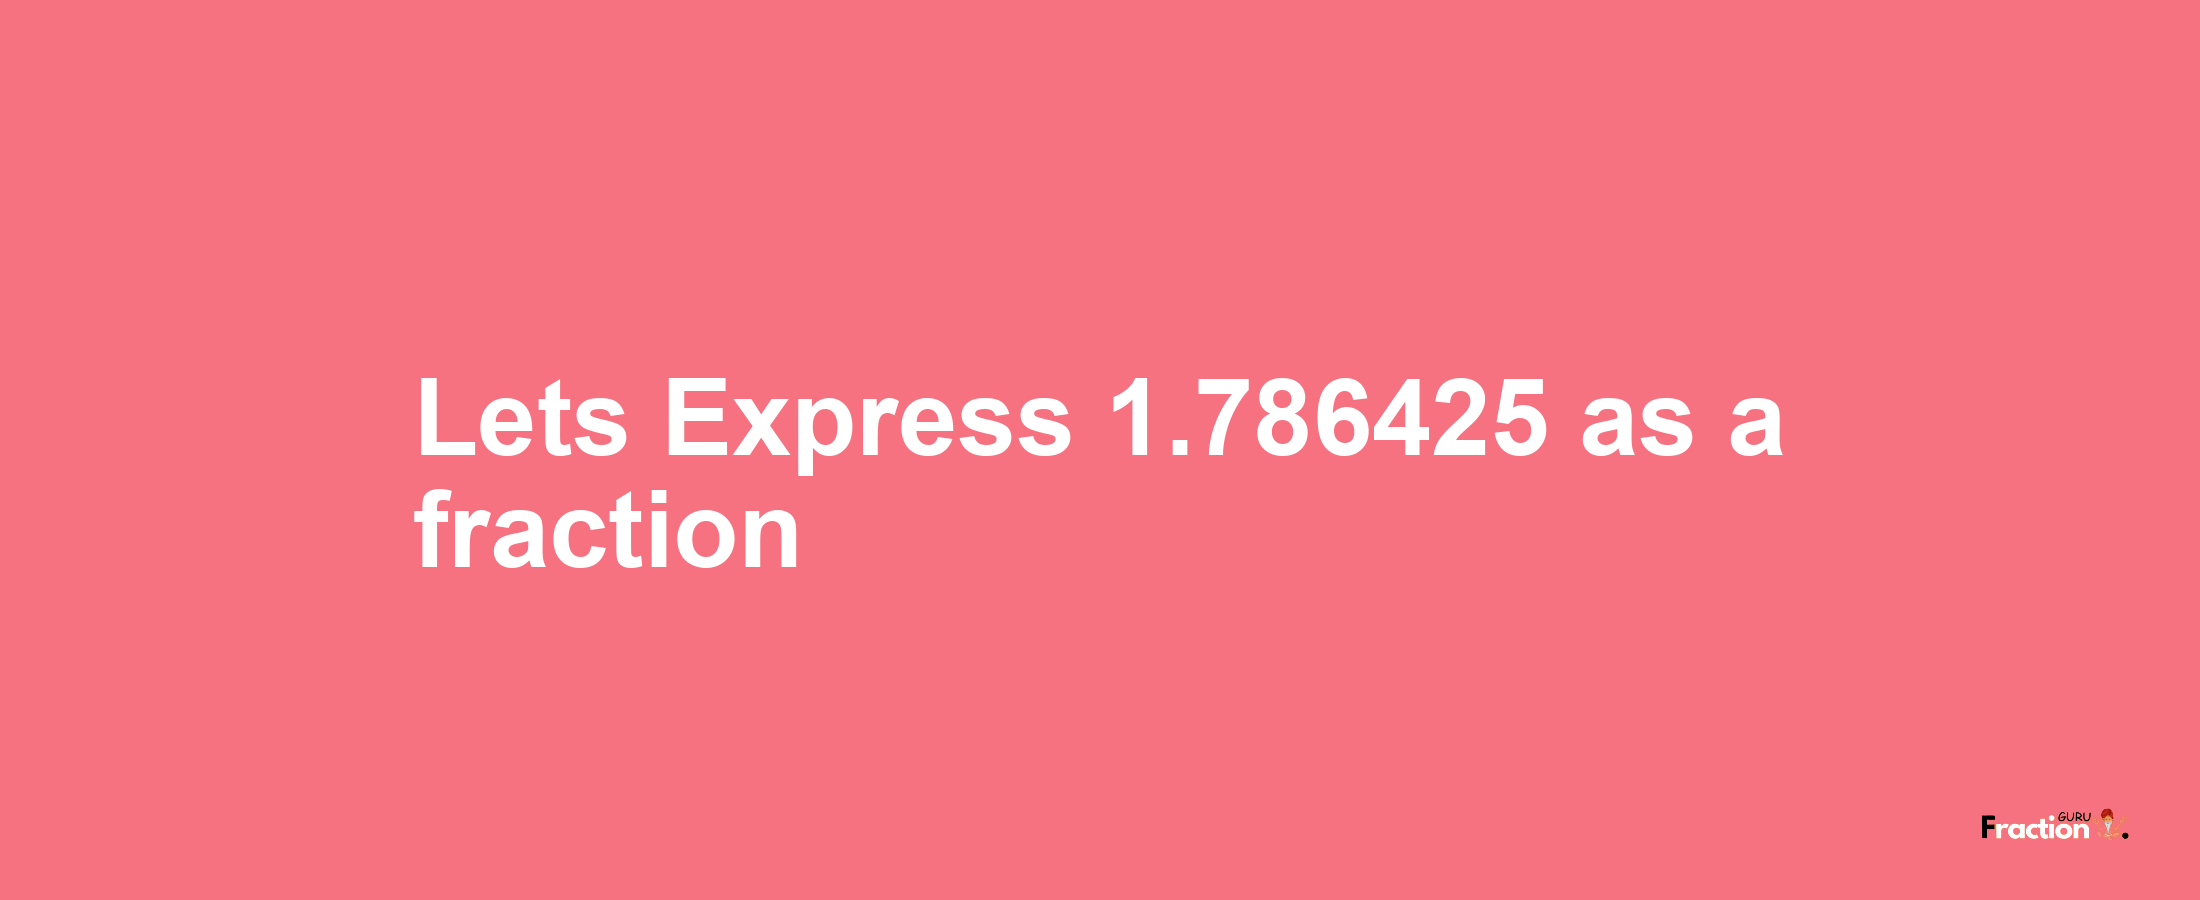 Lets Express 1.786425 as afraction